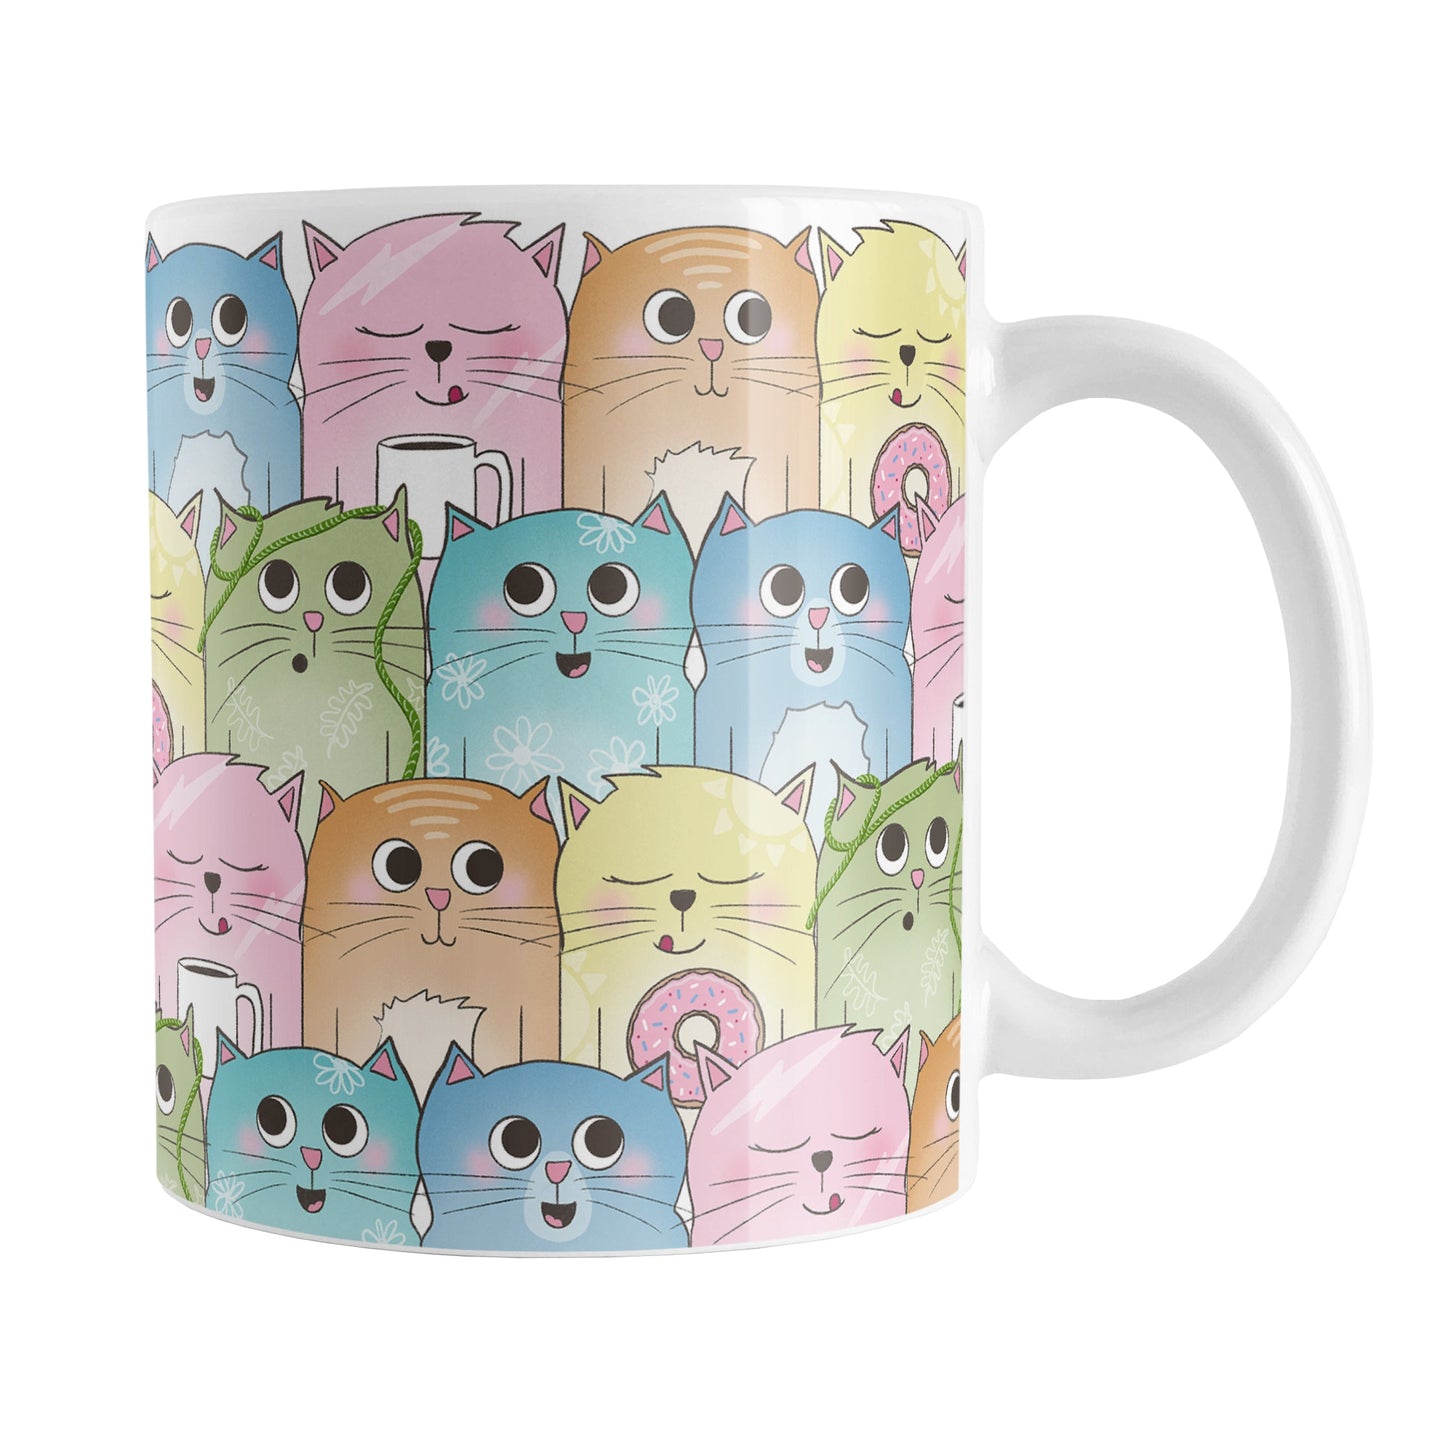 Colorful Cat Stack Pattern Mug (11oz) at Amy's Coffee Mugs. Cute cats mug with an illustrated pattern of different colorful cats (in pink, orange, yellow, green, turquoise, and blue) with different fun expressions, with yarn, coffee, and donuts. This stacked pattern of cats wraps around the ceramic mug to the handle.